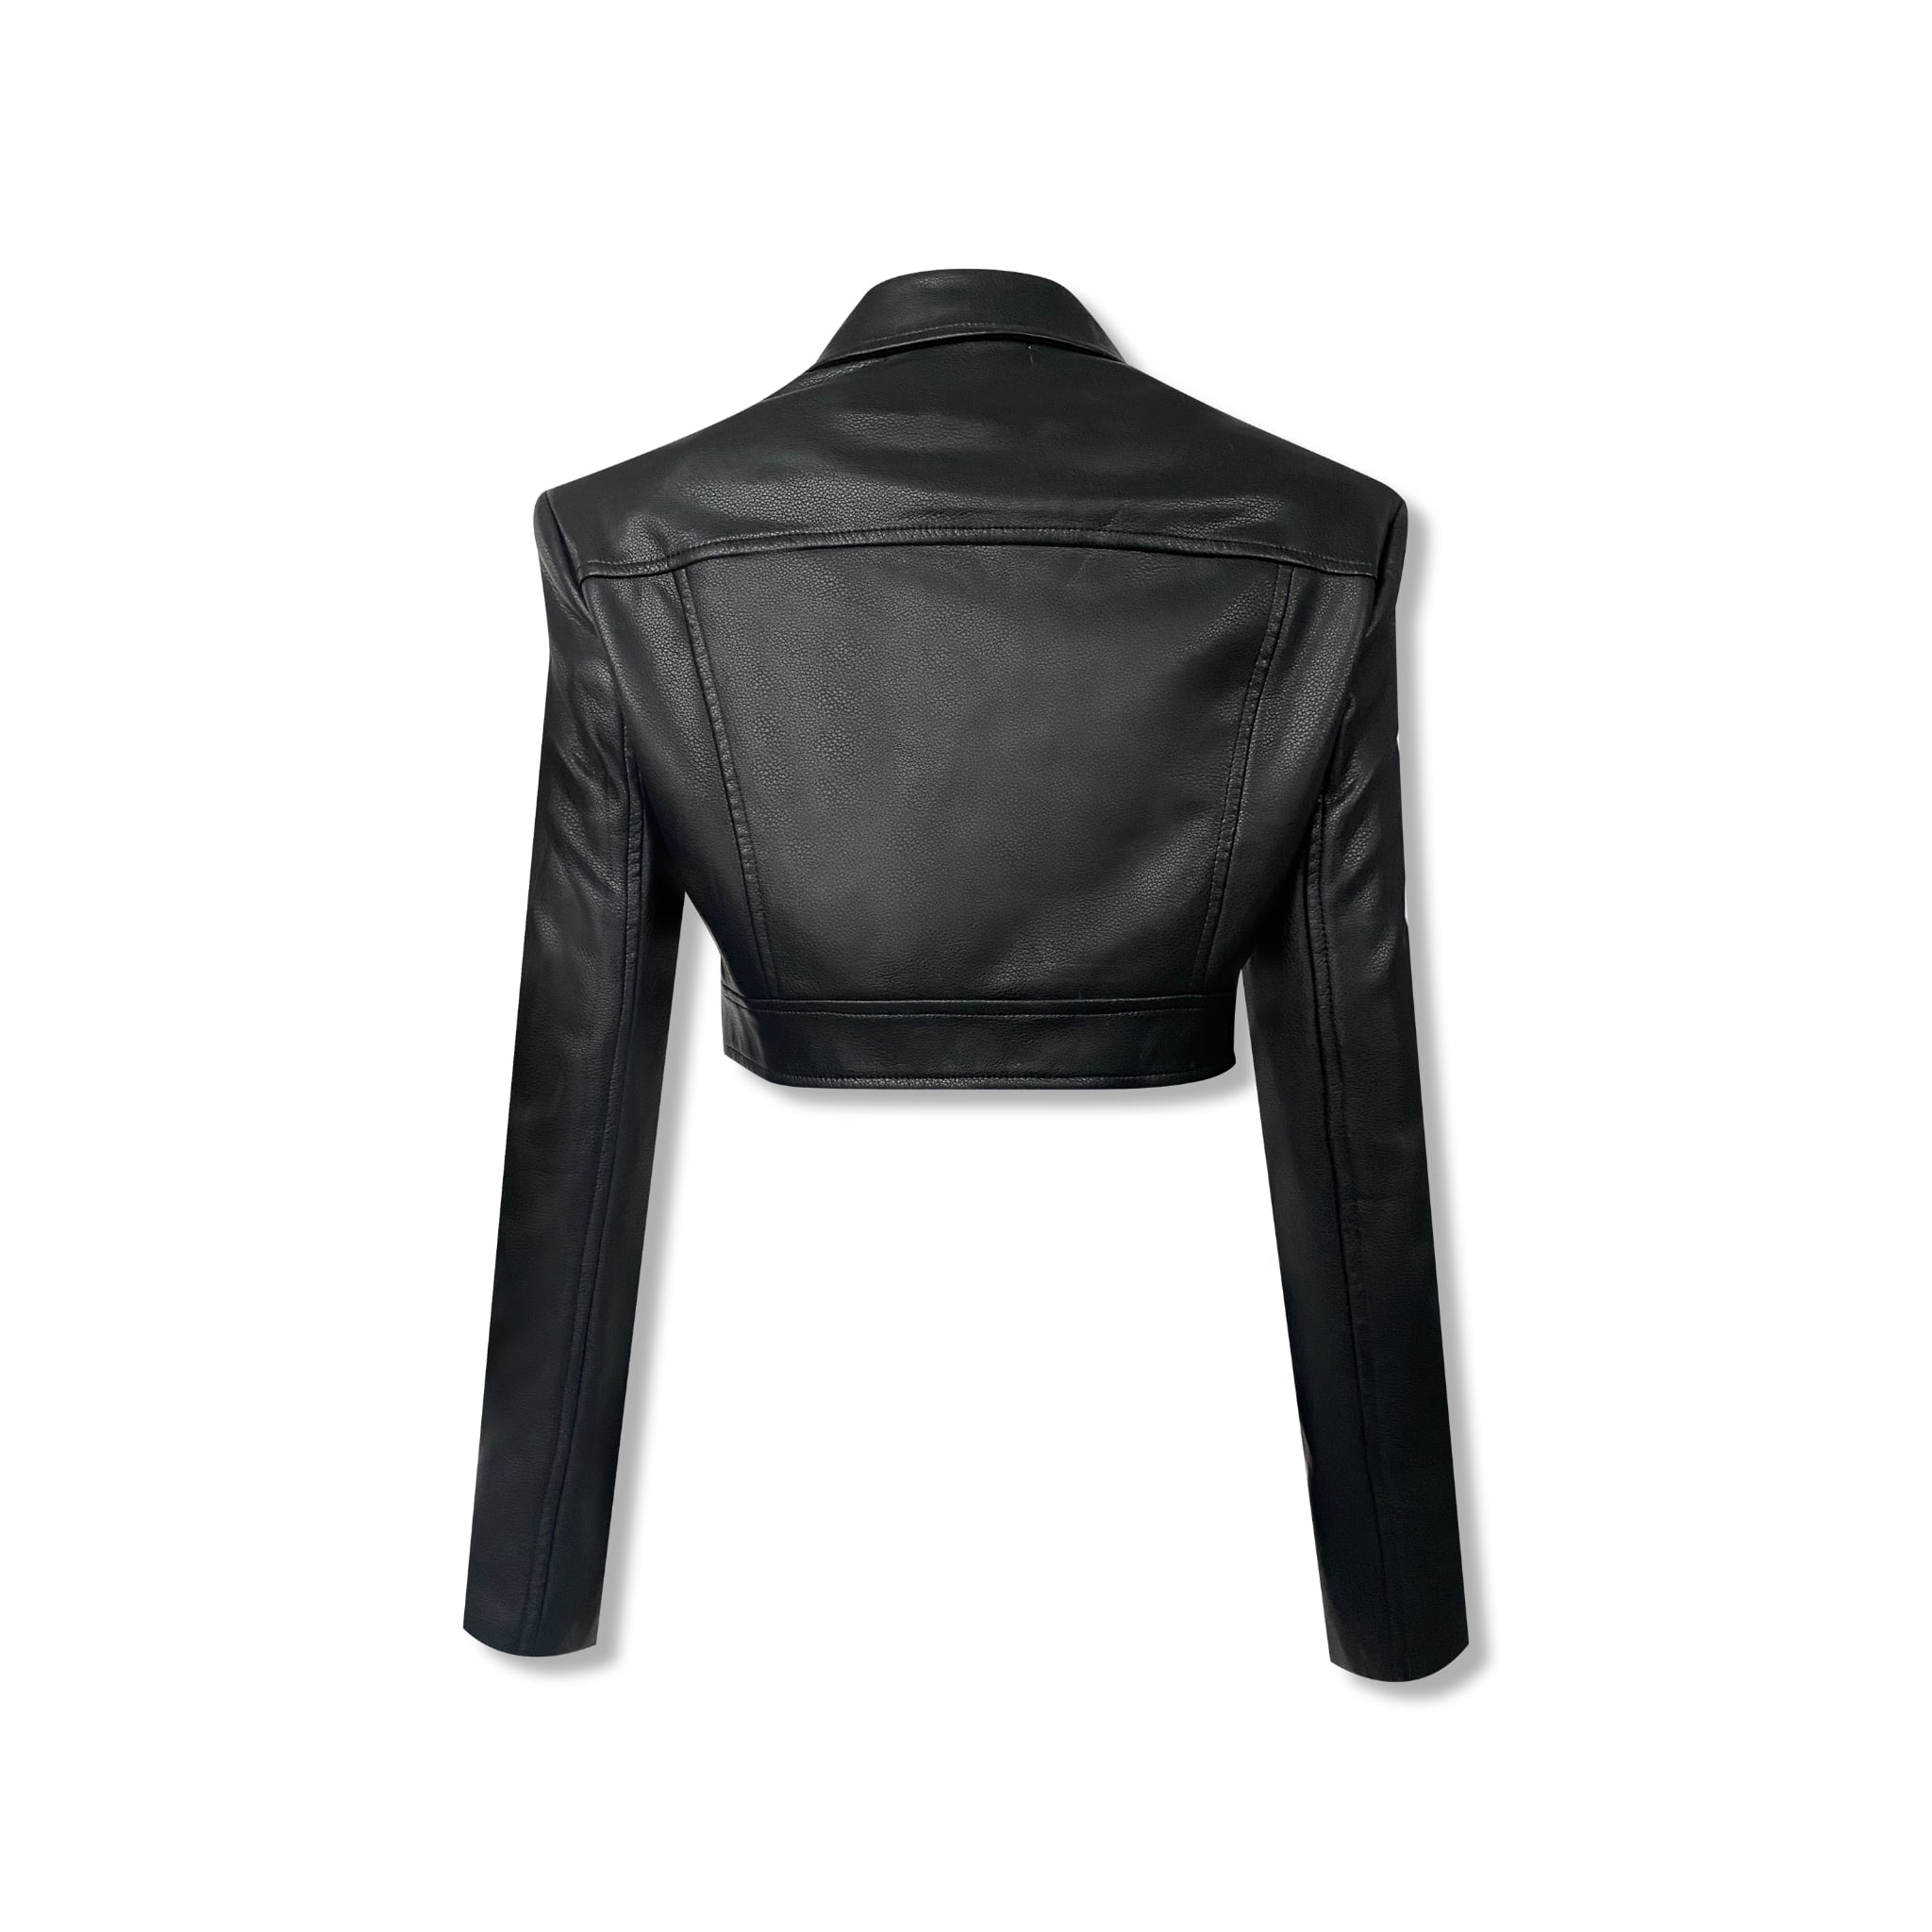 NOT FOR US Black Zip Leather Jacket | MADA IN CHINA